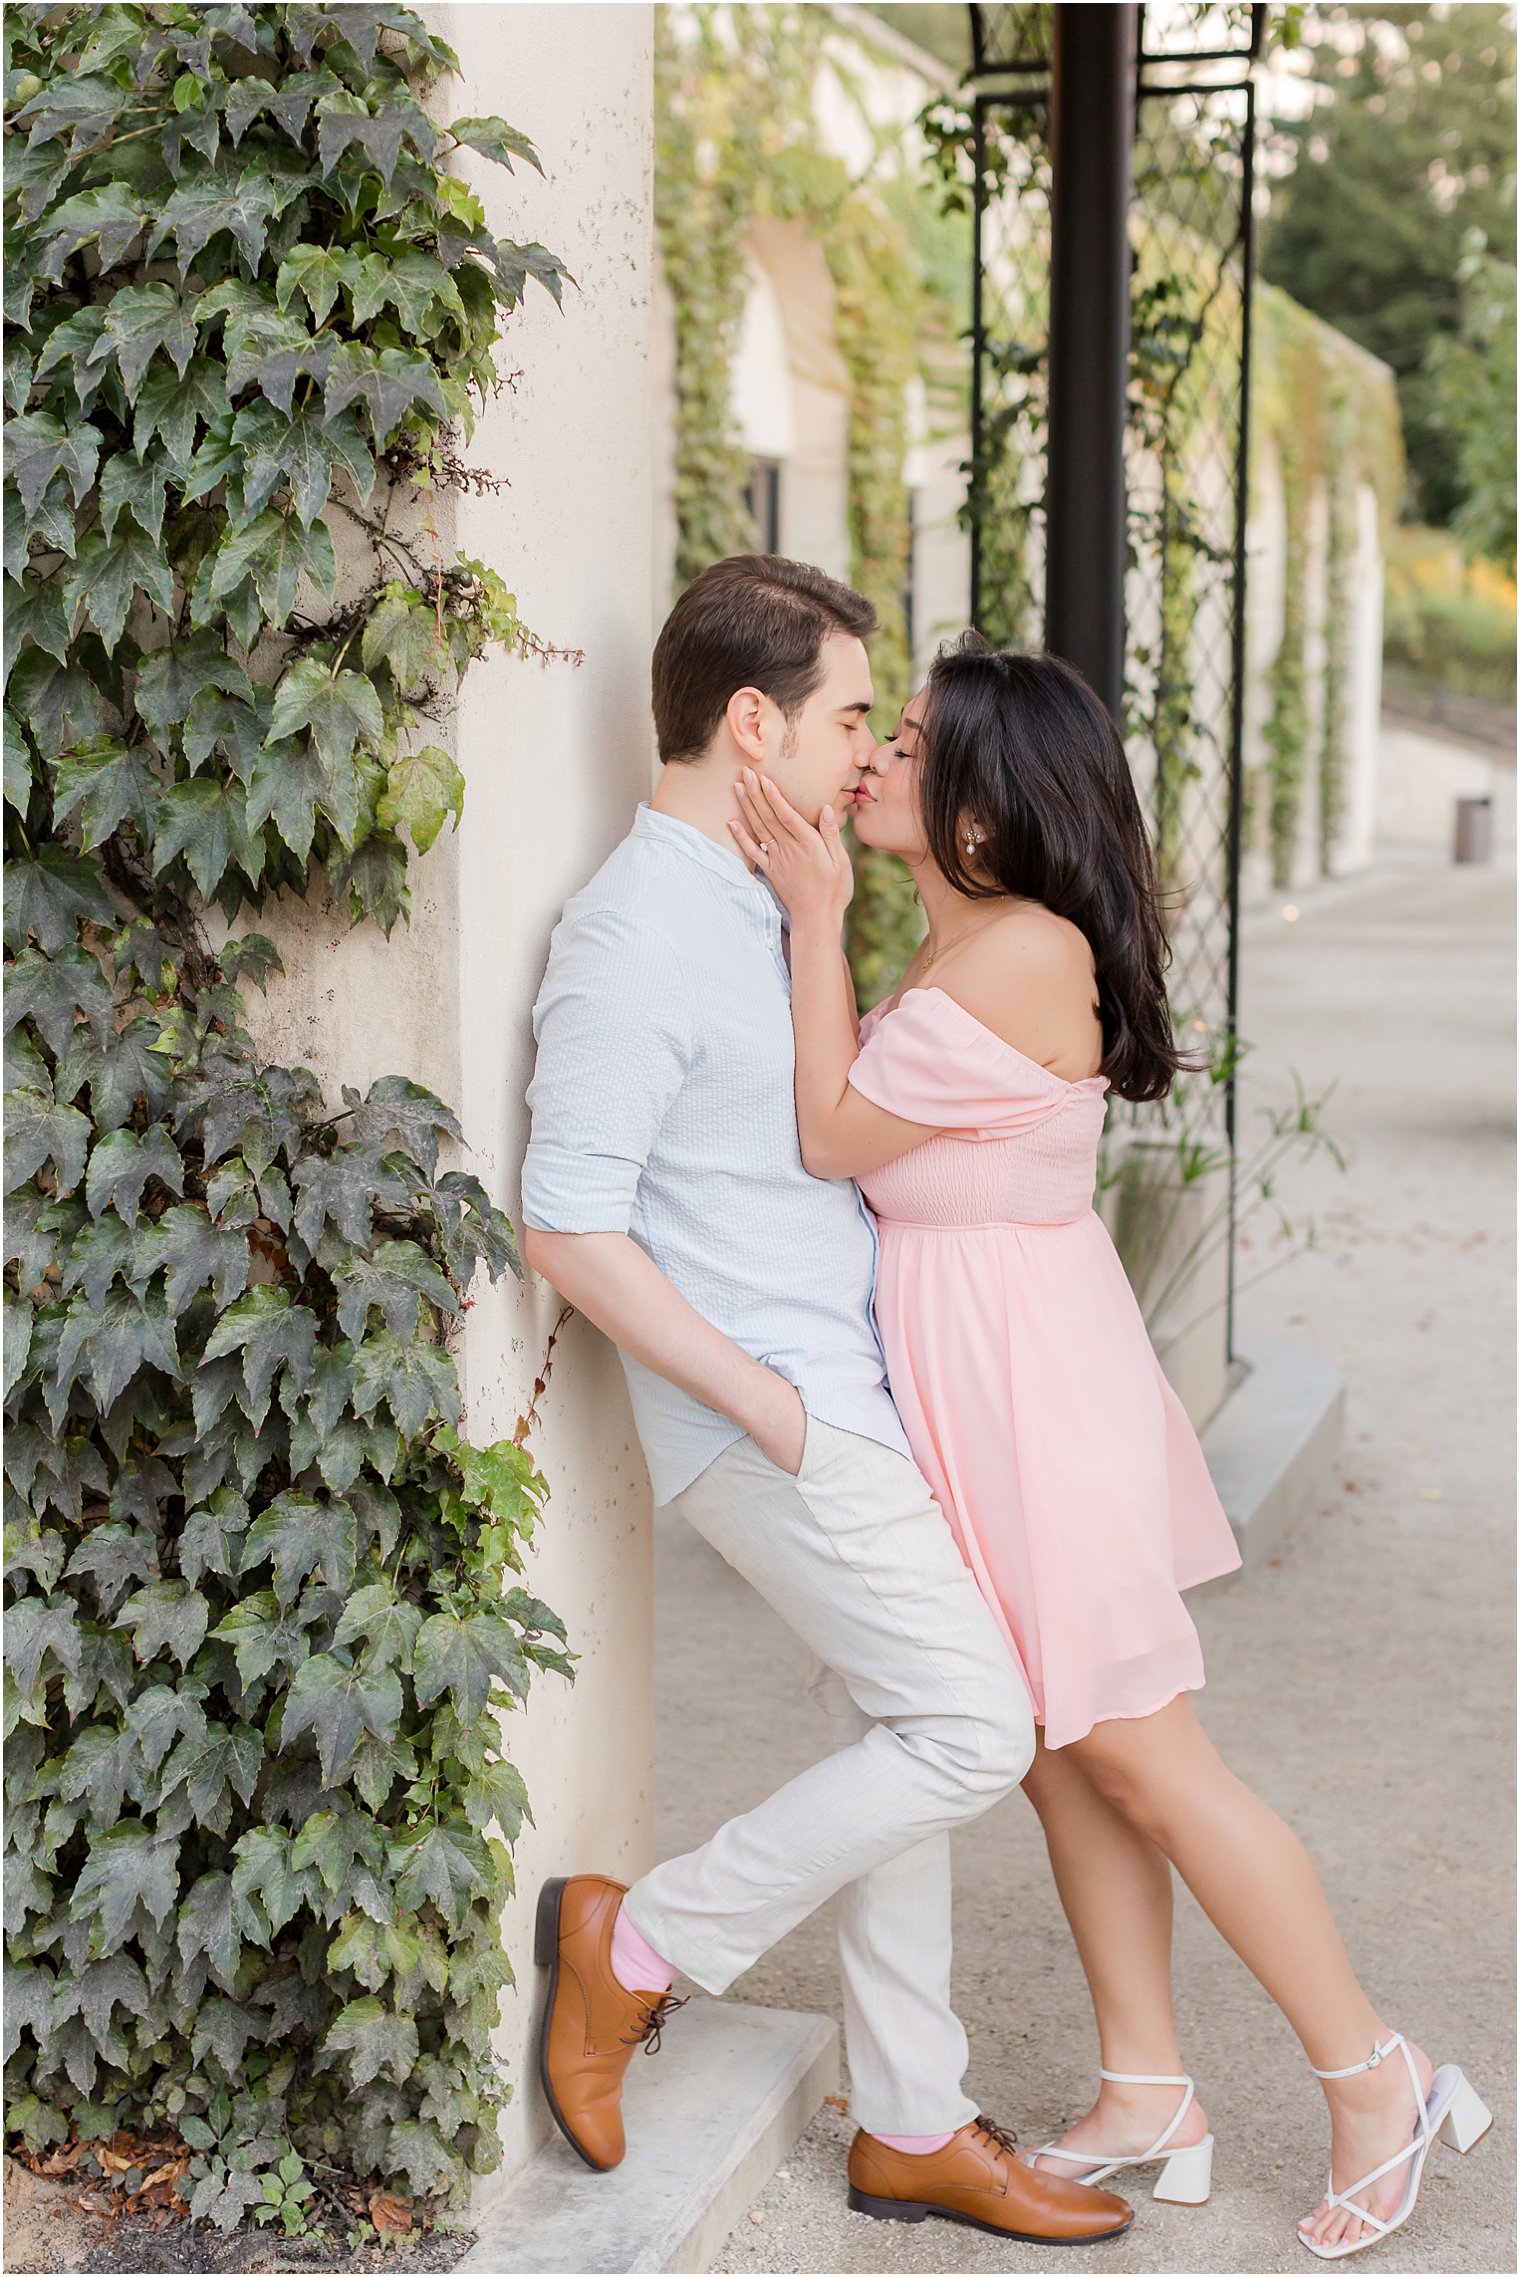 man in blue shirt leans against wall while woman in pink dress leans to kiss him